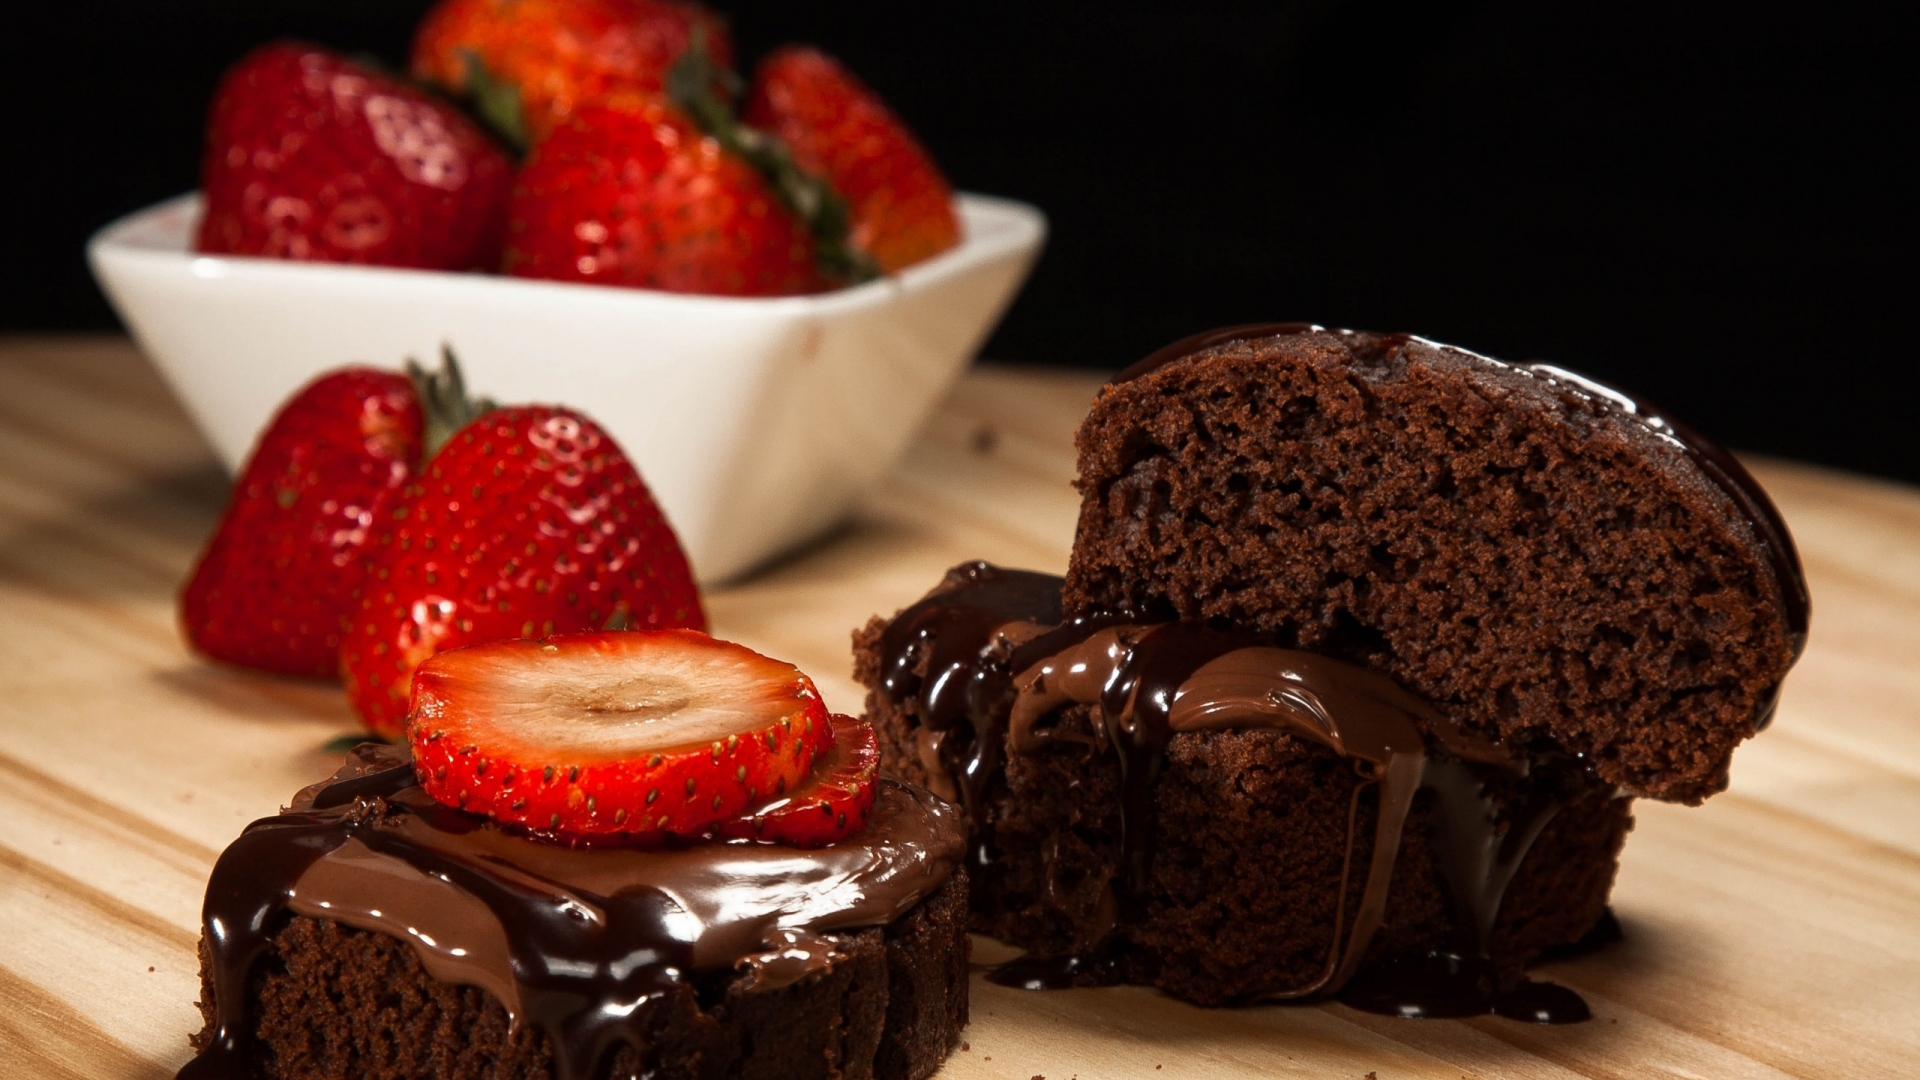 Chocolate and Strawberry Cake for 1920 x 1080 HDTV 1080p resolution